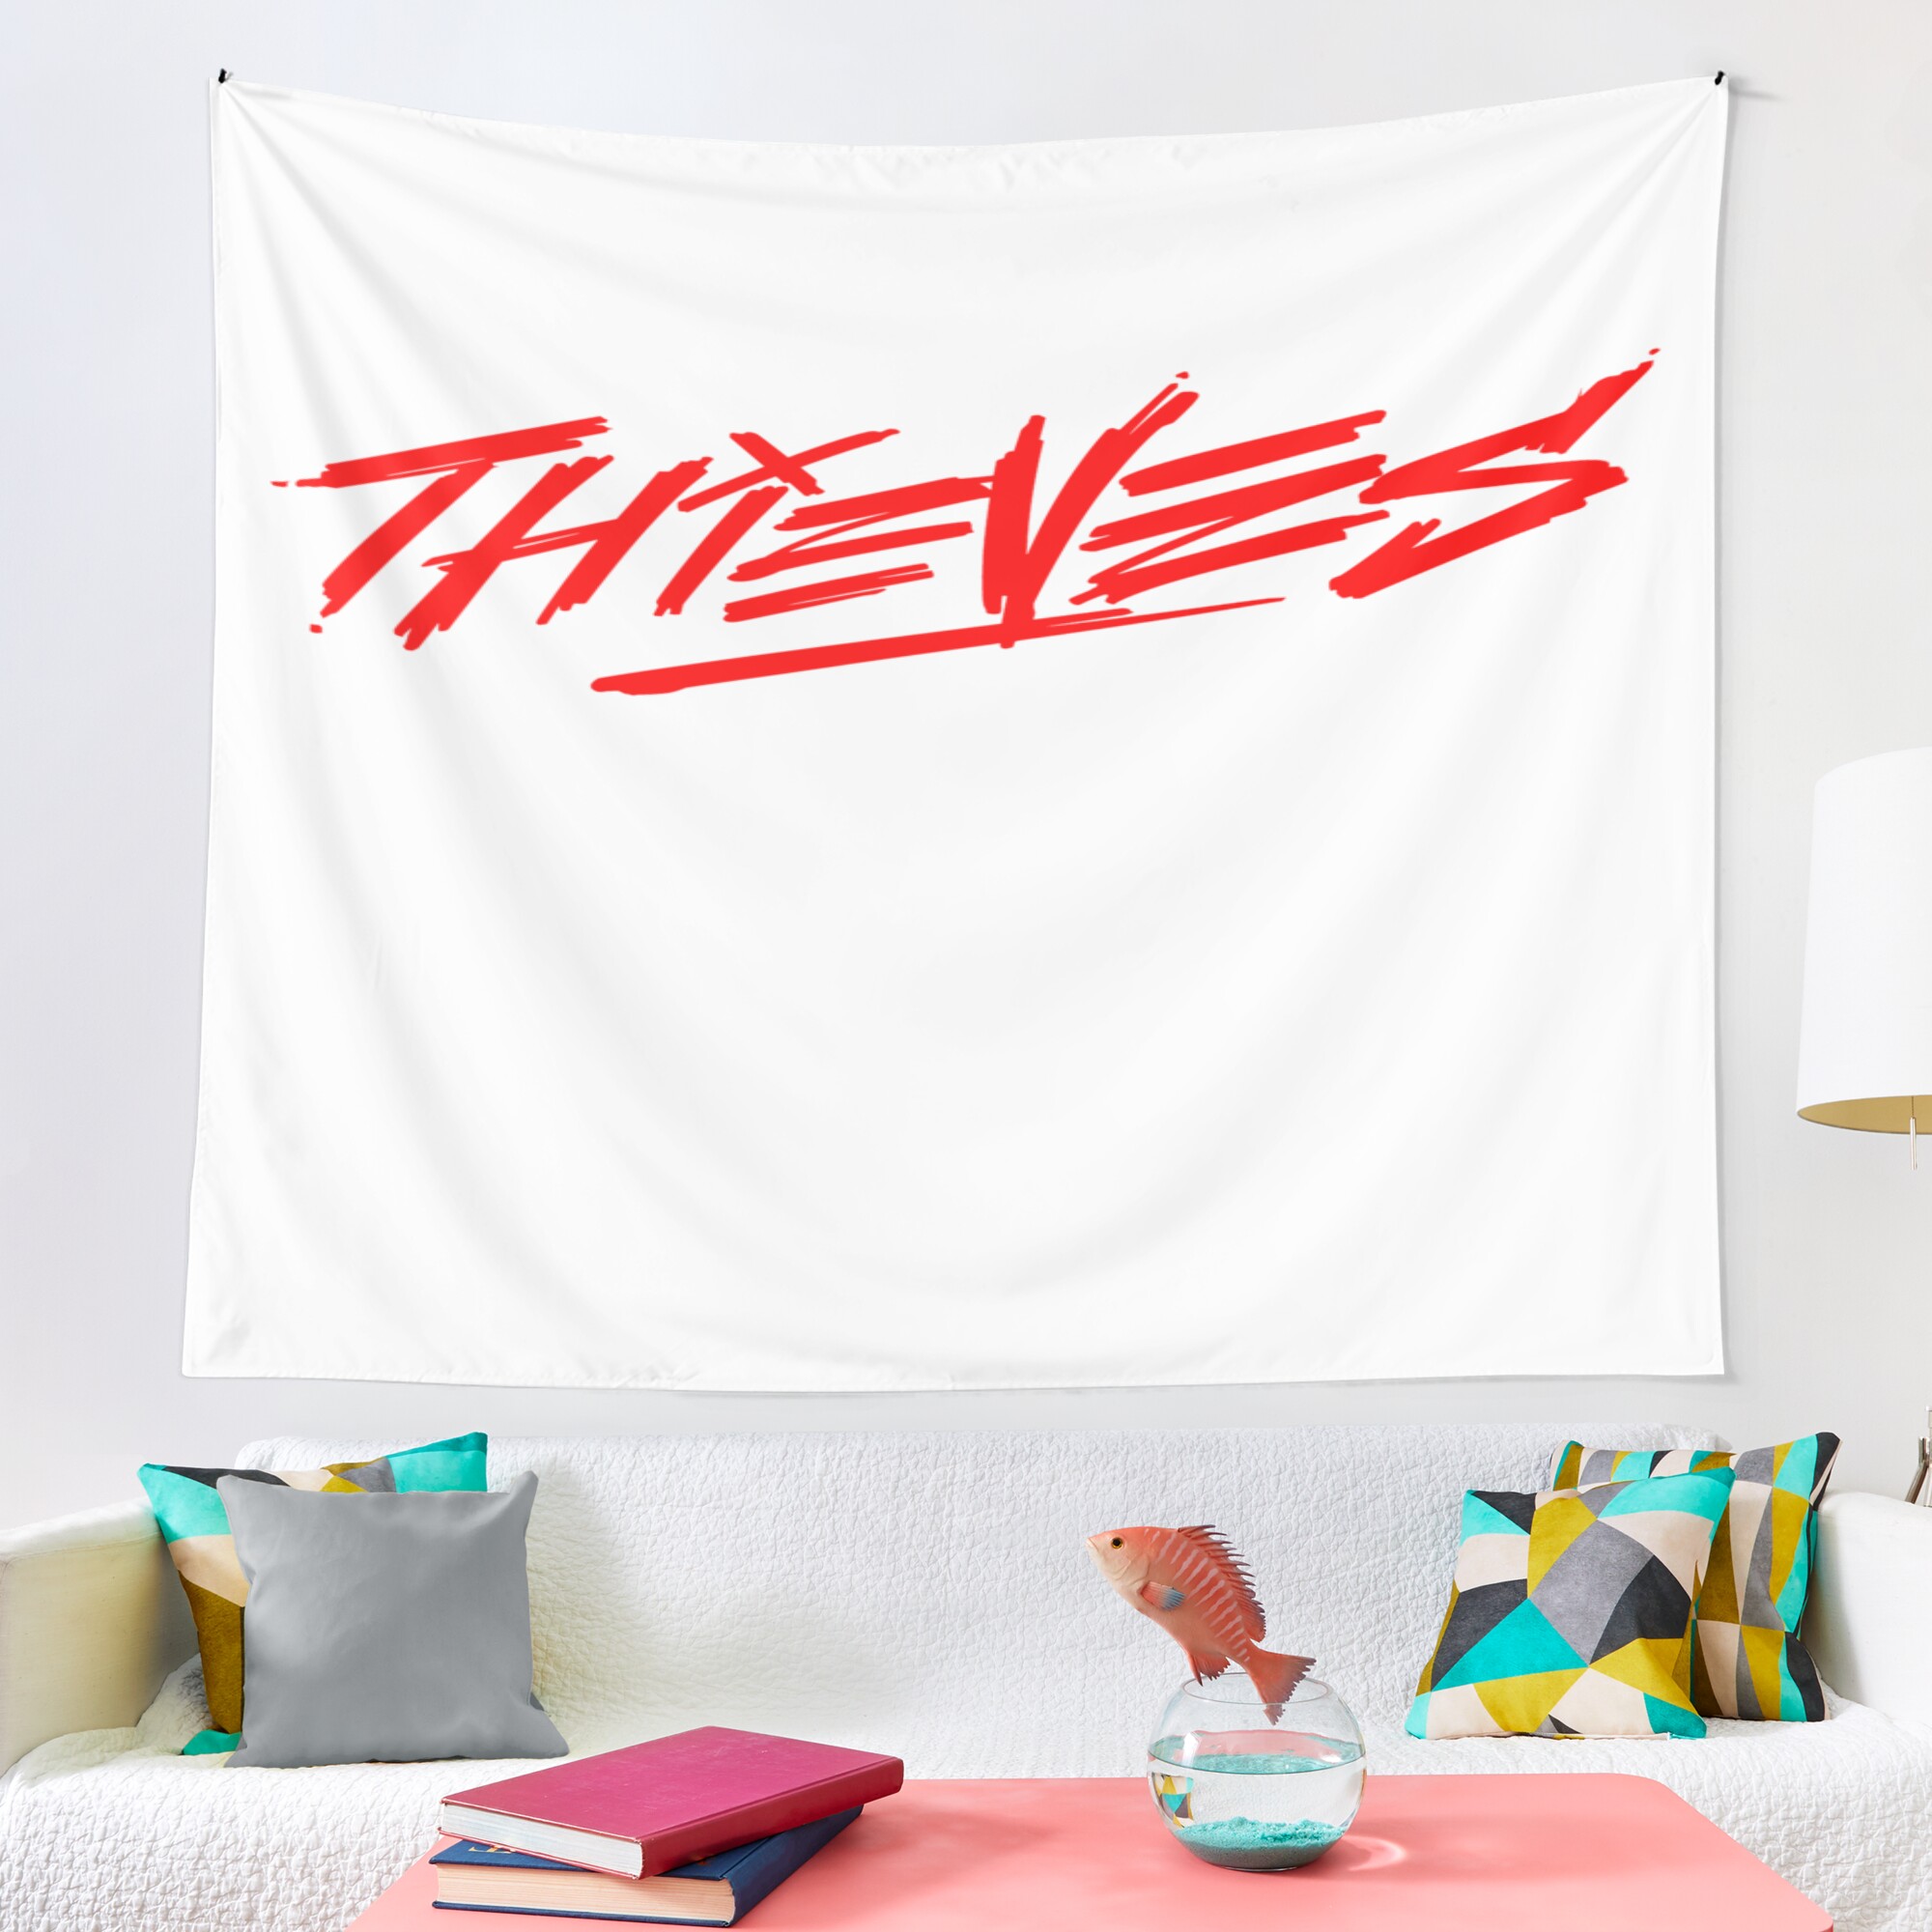 urtapestry lifestyle largesquare2000x2000 8 - 100 Thieves Shop